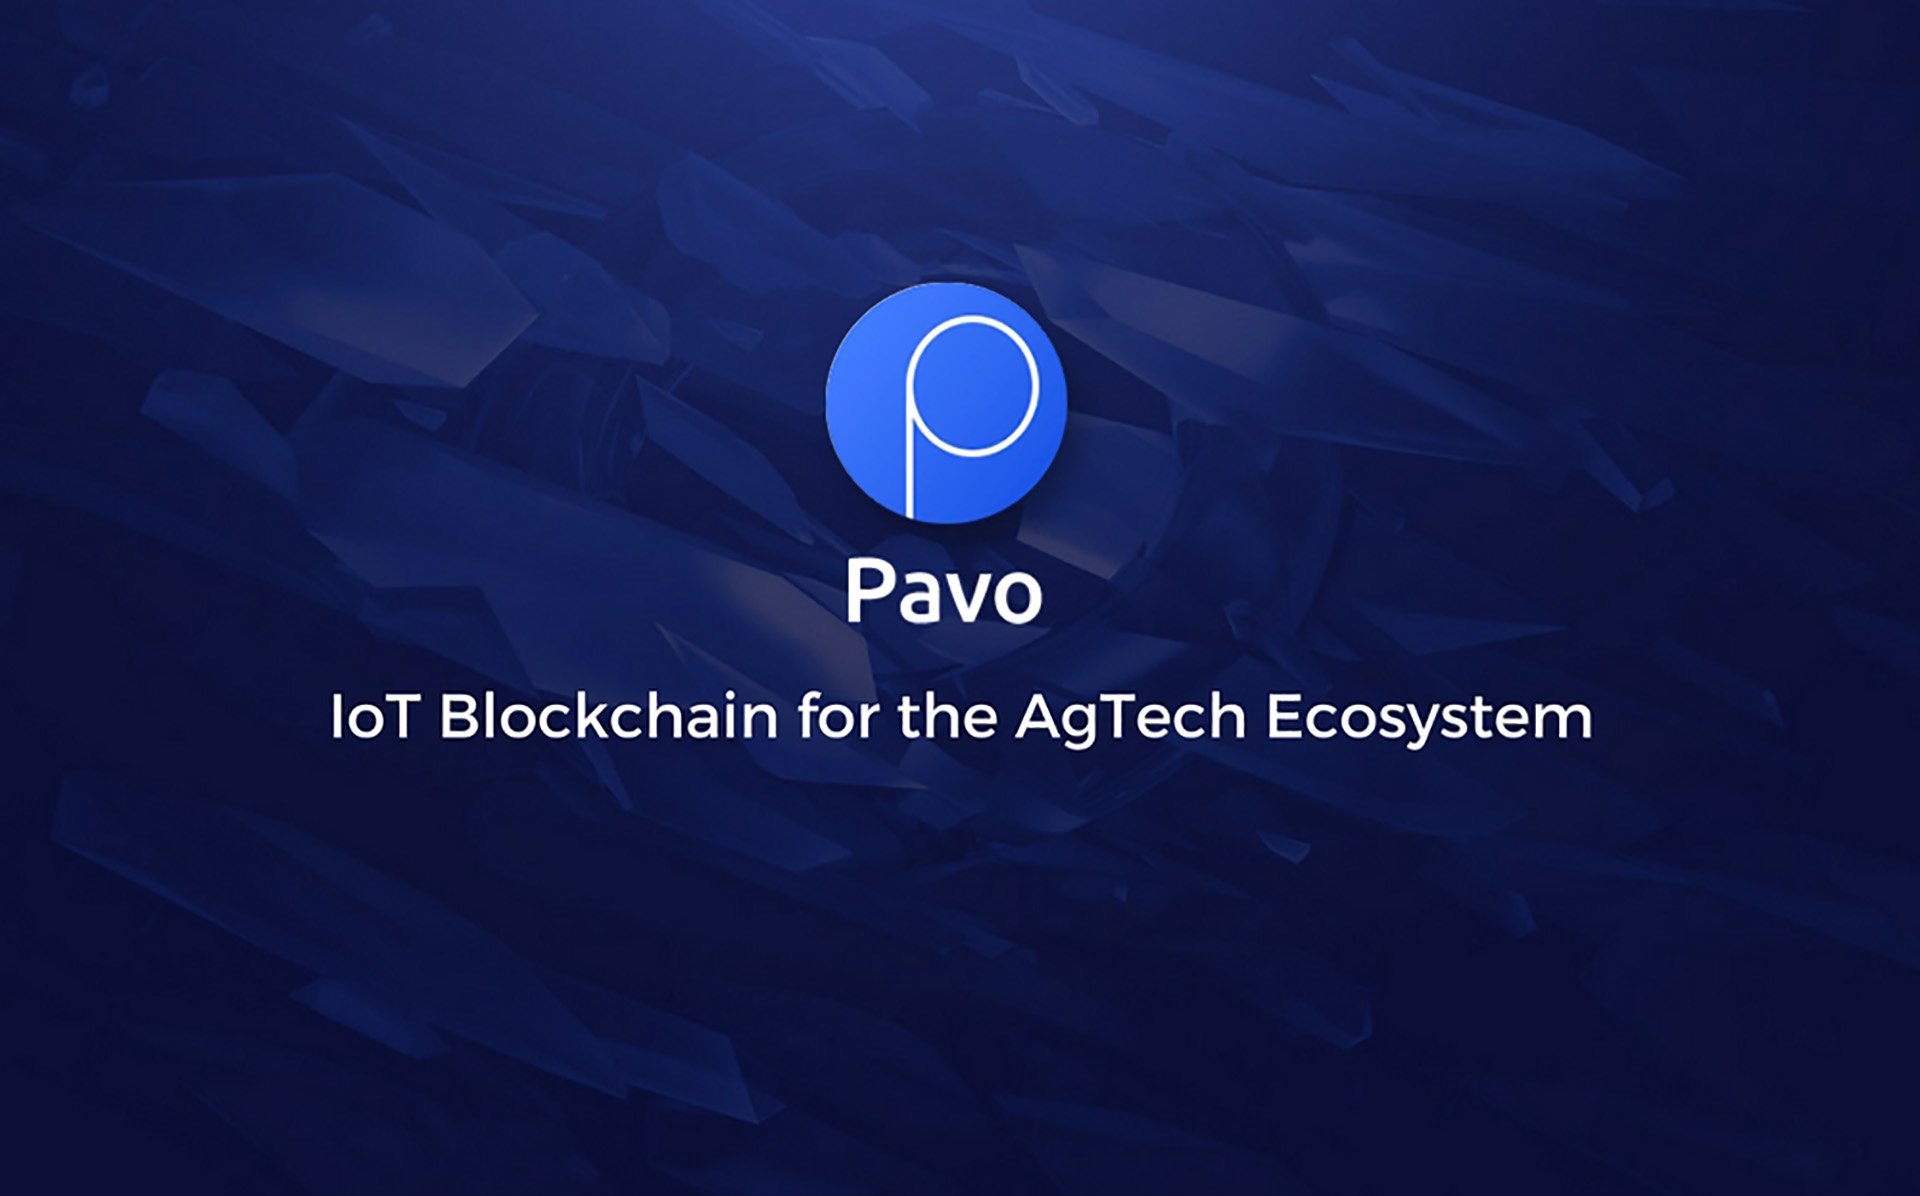 Pavo Performs Ongoing California Installations of Their IoT Blockchain Solution for Agriculture